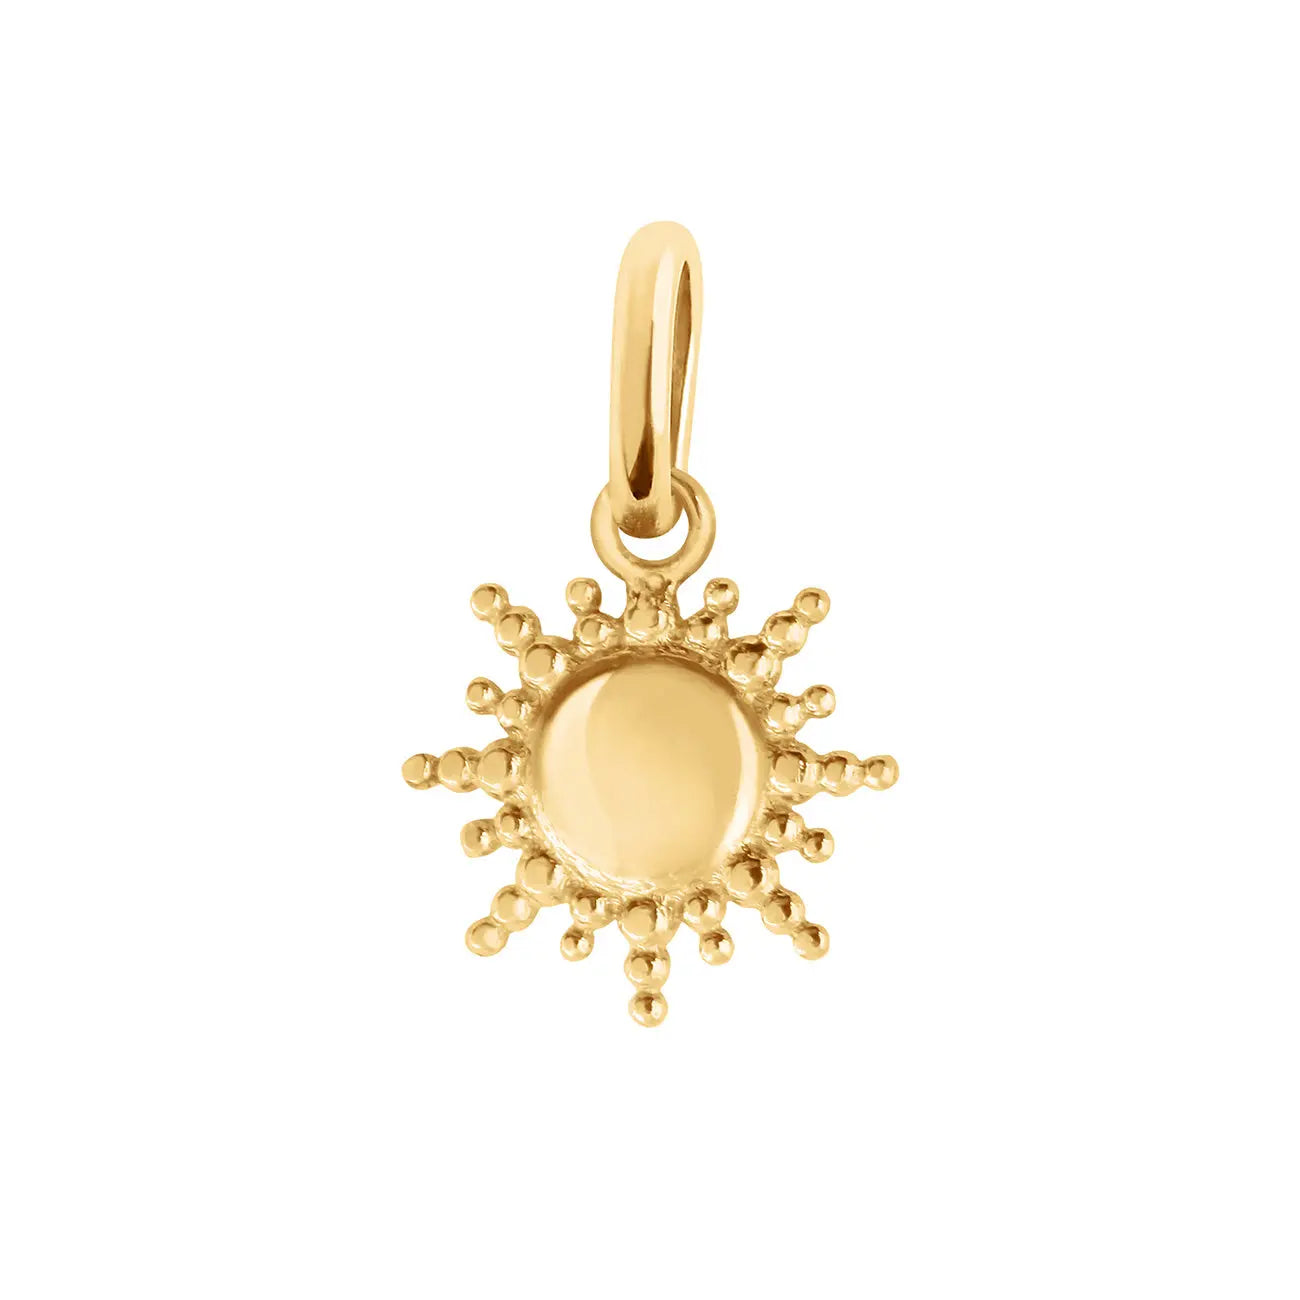 The Sun gold pendant by gigi CLOZEAU is a playful yet sophisticated take on our voyage through life. This striking piece features 18k gold and a timeless design to capture a sense of elegance.  Each jewel is unique, artisanally made in its family-owned workshop. The pendant mesures 0.4" (with bail 0.6"), pendant sold without chain.